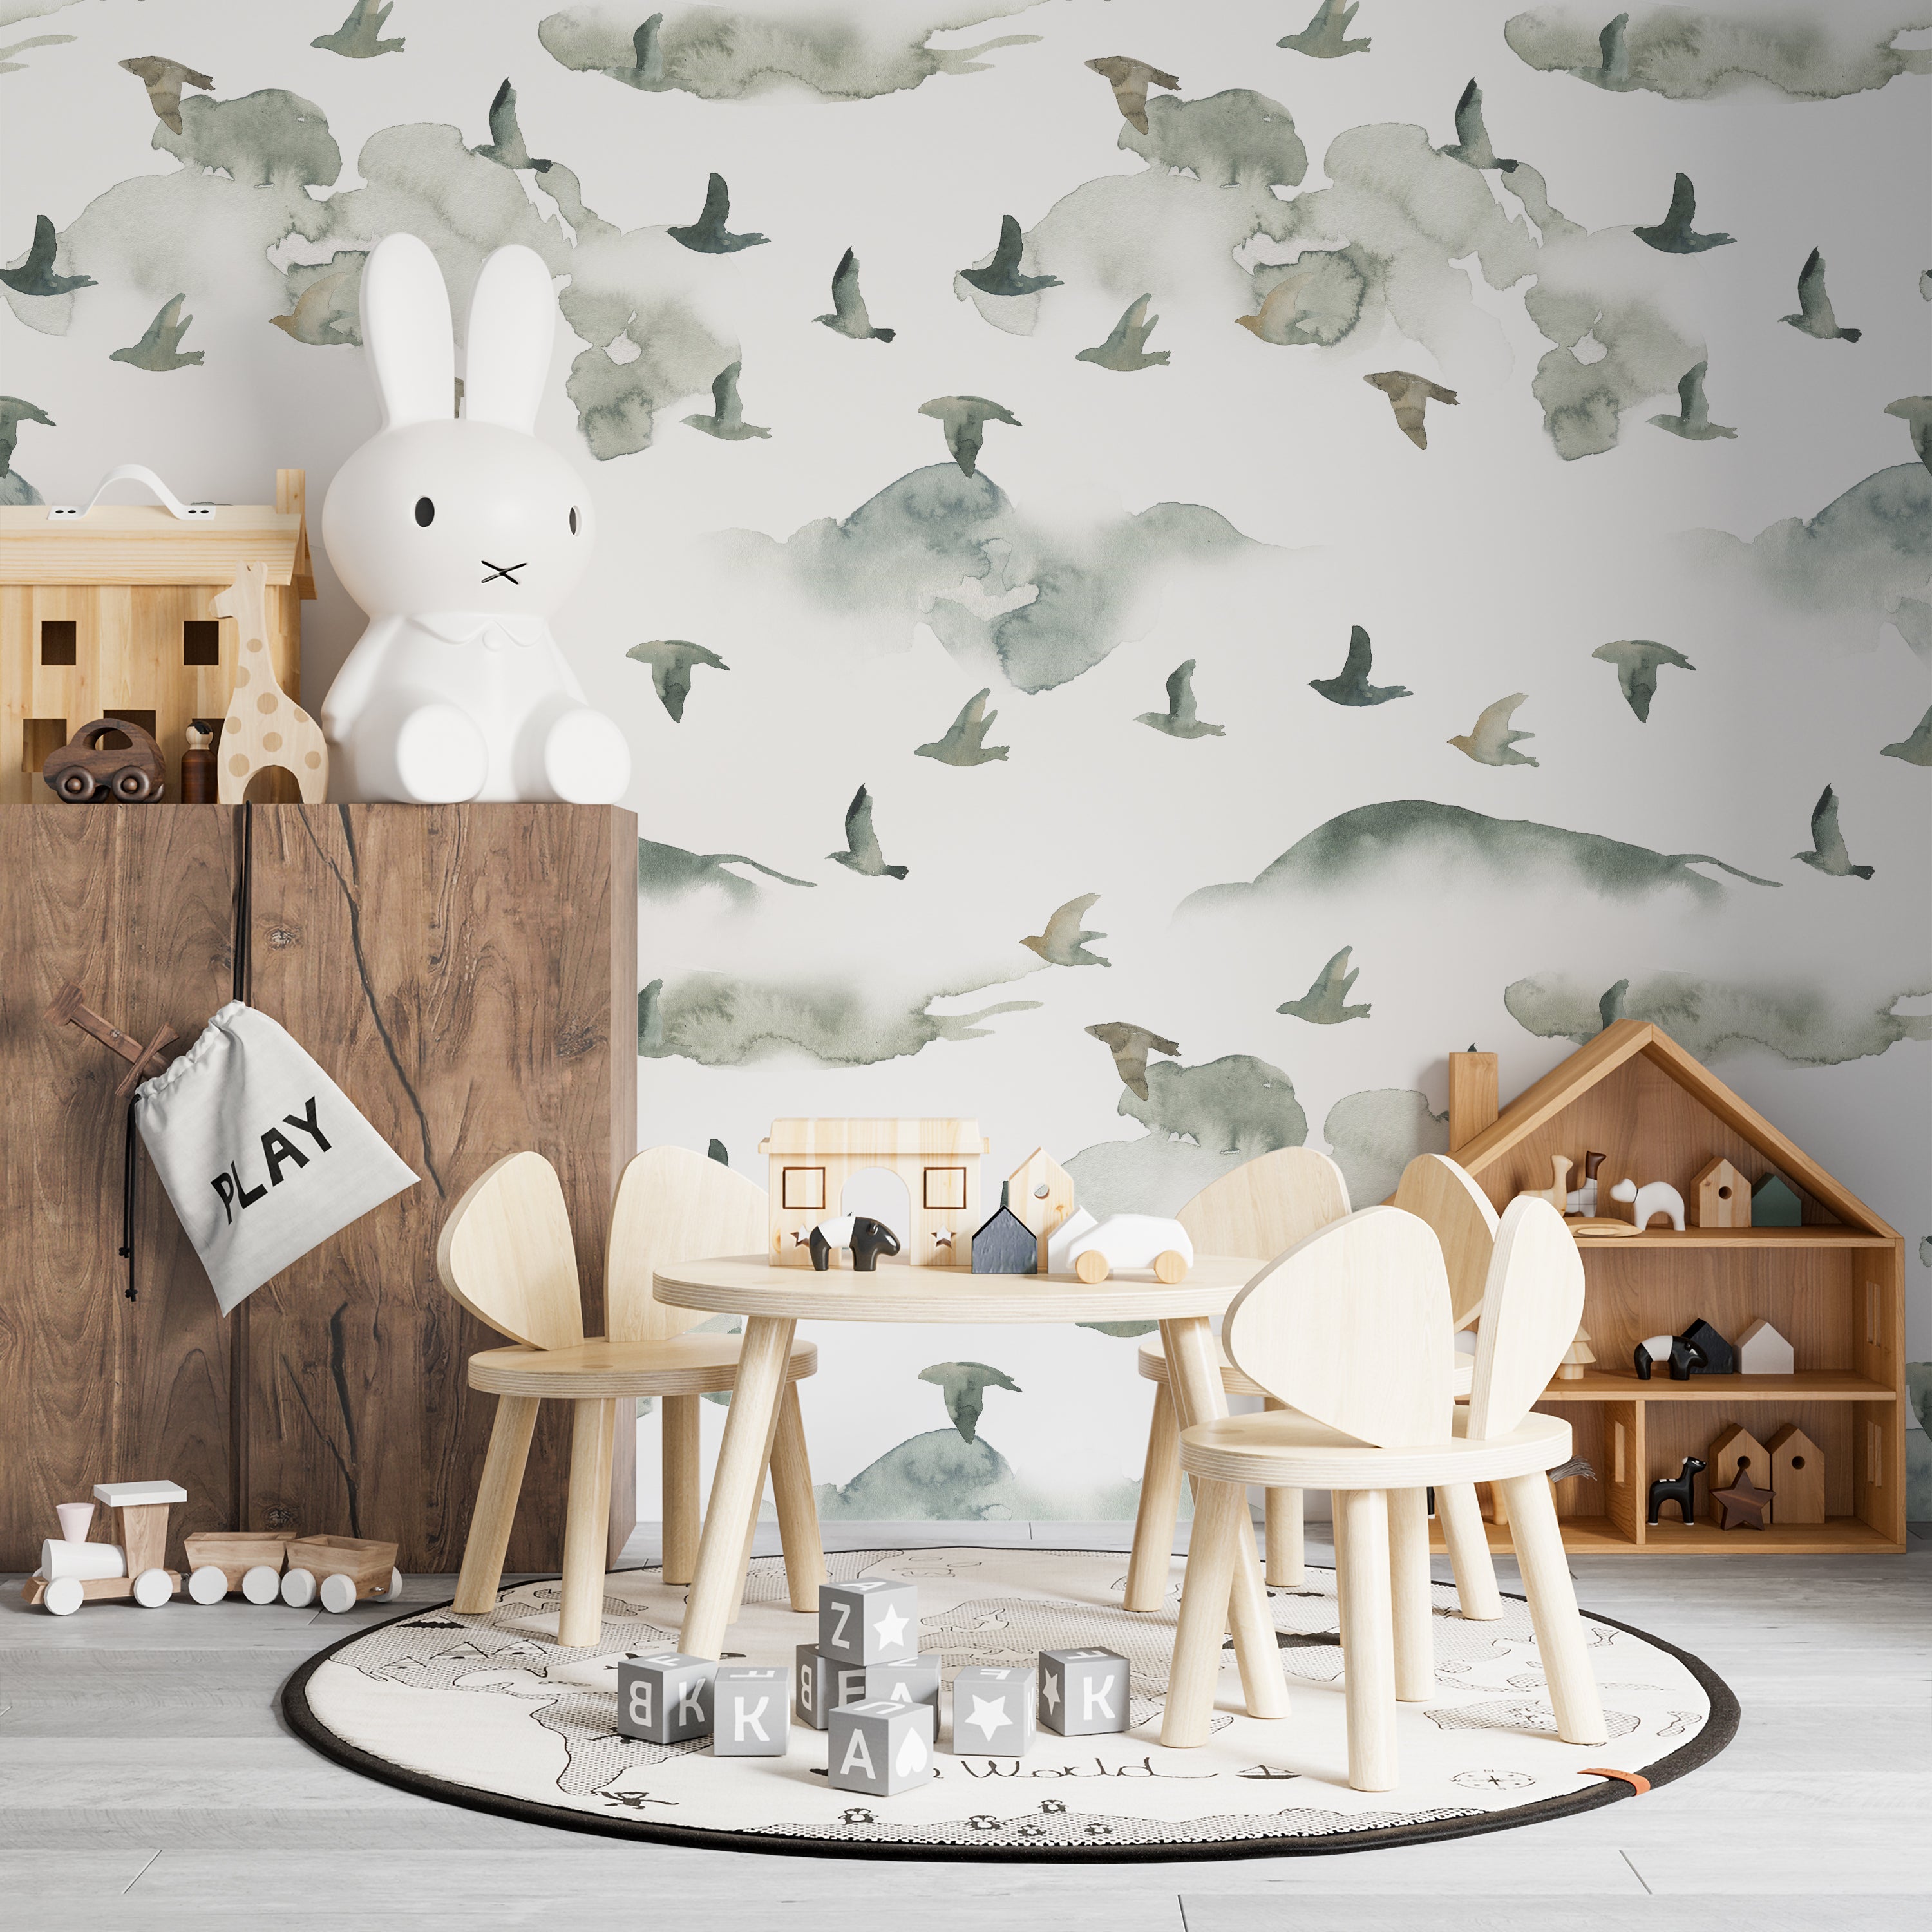 A child's playroom with the "Wild Pinery Wallpaper" adorning the walls, creating a whimsical backdrop for play and imagination. The wallpaper's subtle depiction of a forest with birds in various poses complements the room's wooden toys and furniture, enhancing the space with a sense of outdoor adventure.